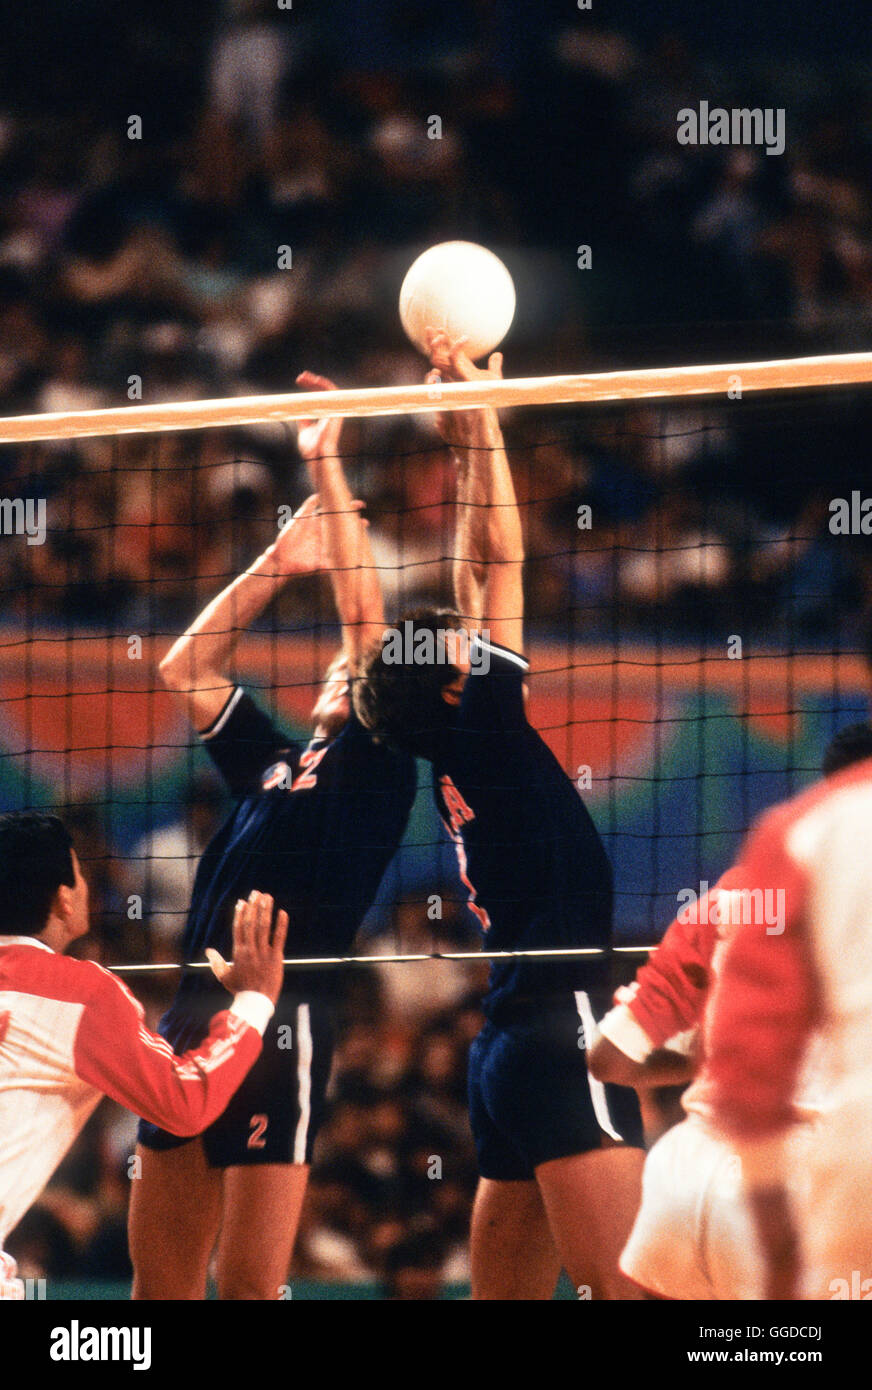 USA #2 Dave Saunders and #1 Dusty Dvorak in action during match at Long Beach Arena, Long Beach, CA Stock Photo